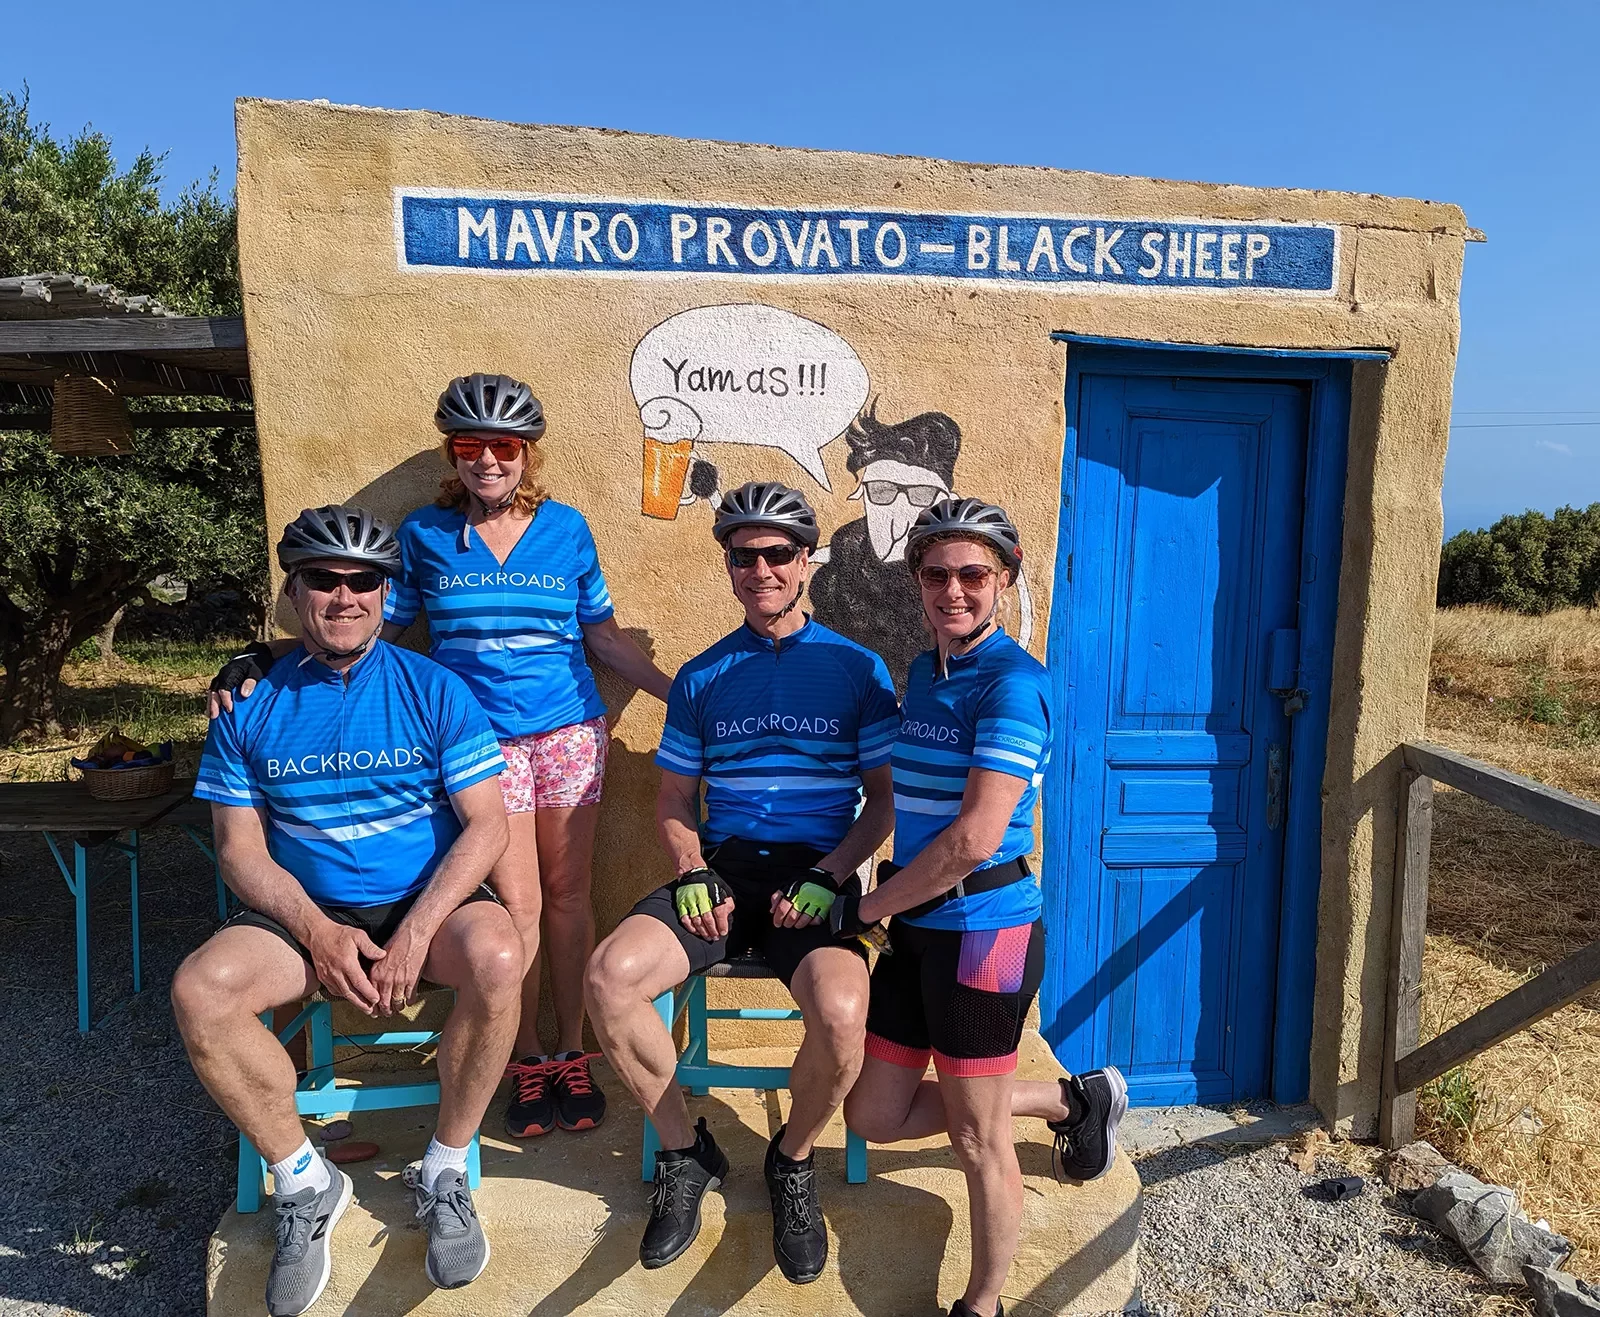 Four guests in biking gear at small rest point building.